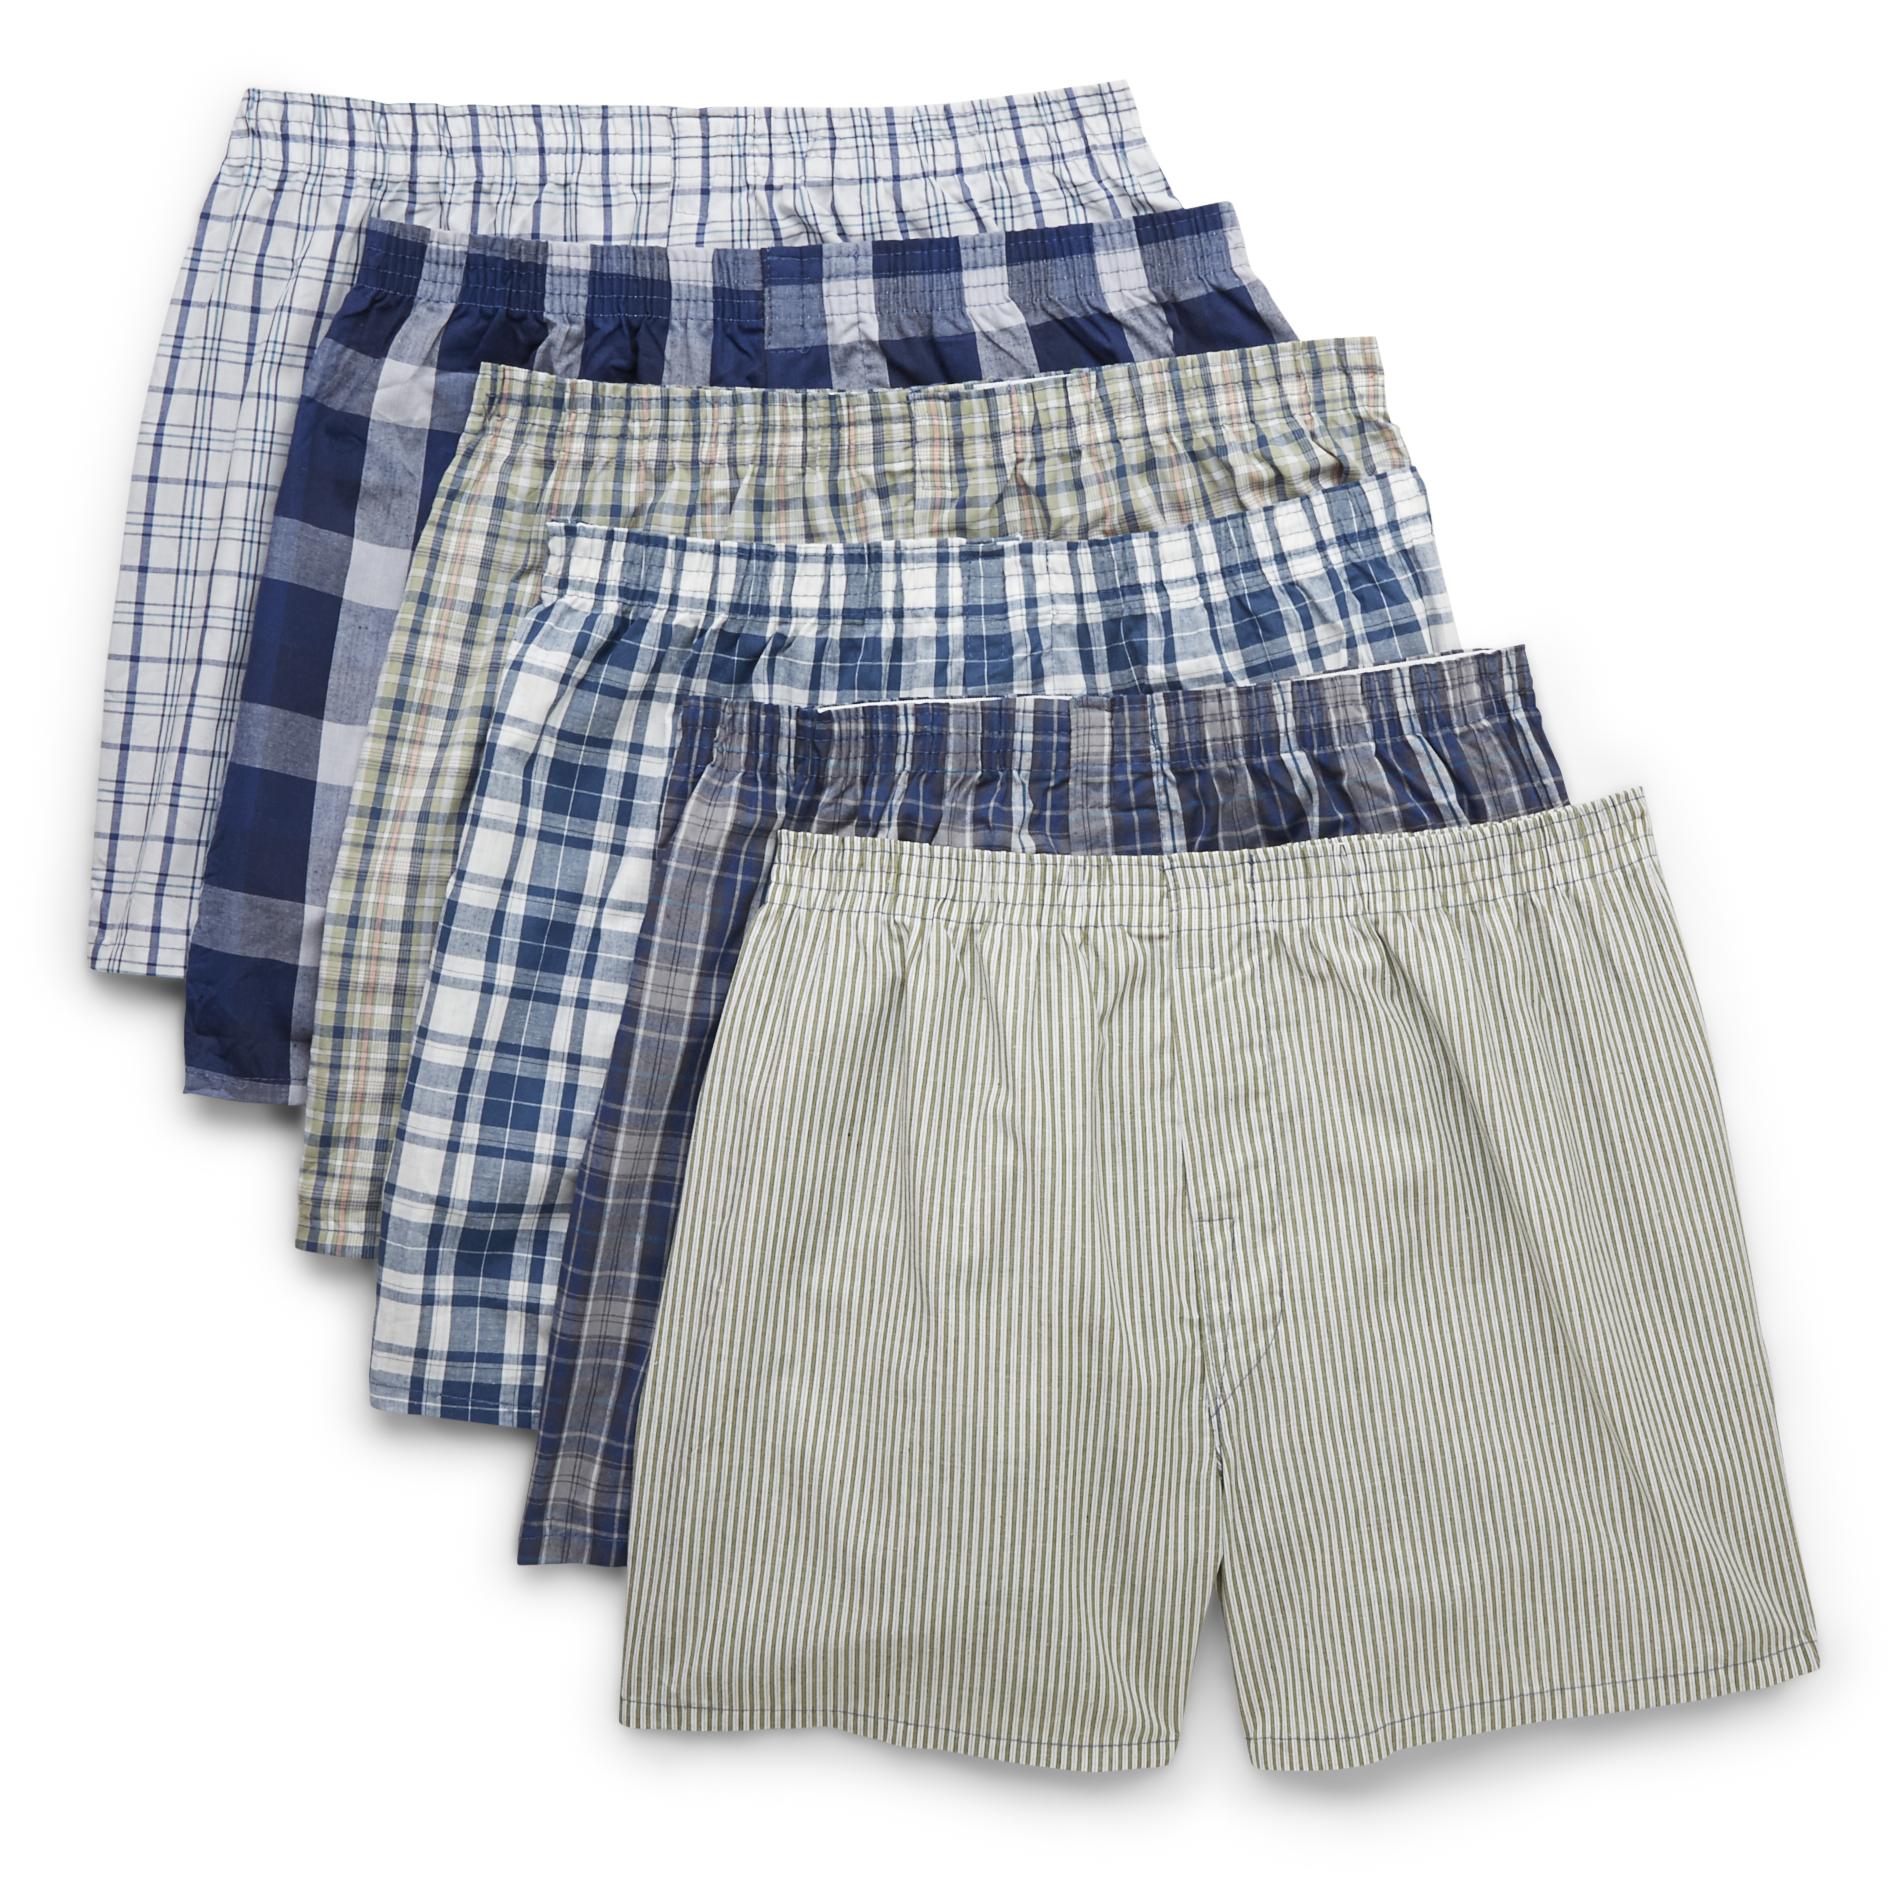 Fruit of the Loom Men’s Boxers 5 Pack Low Rise